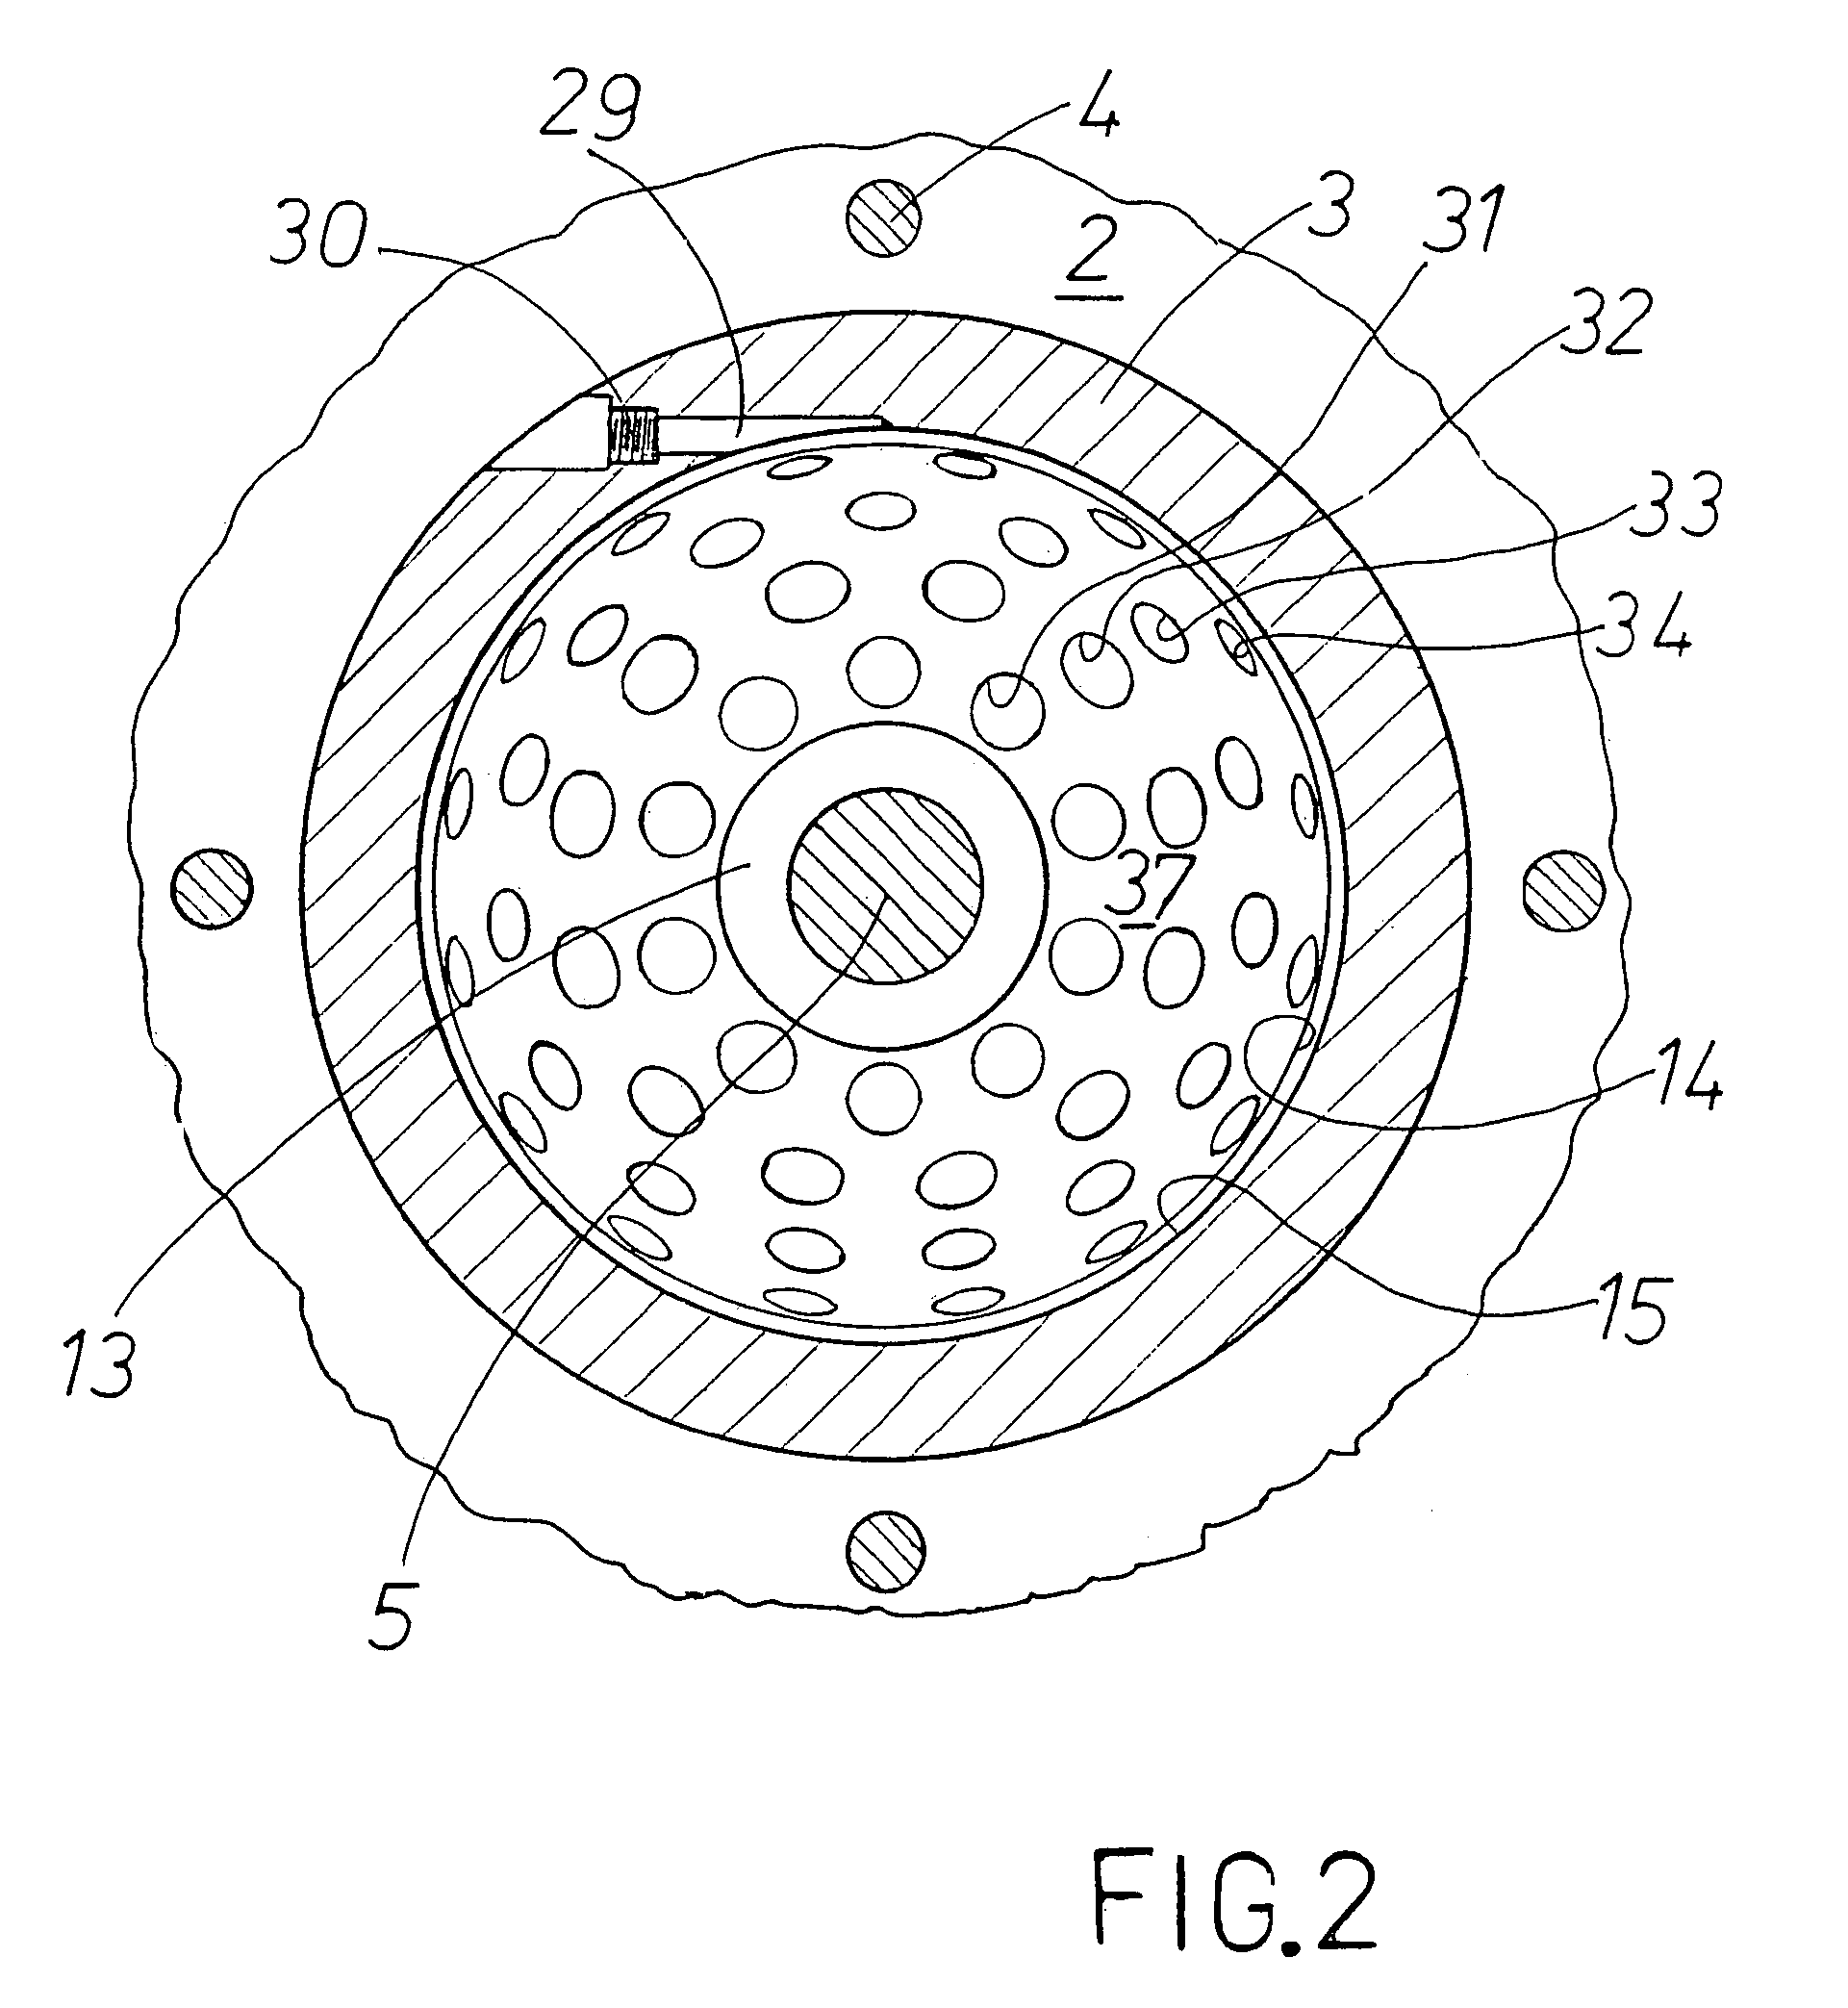 Apparatus and method for heating fluids